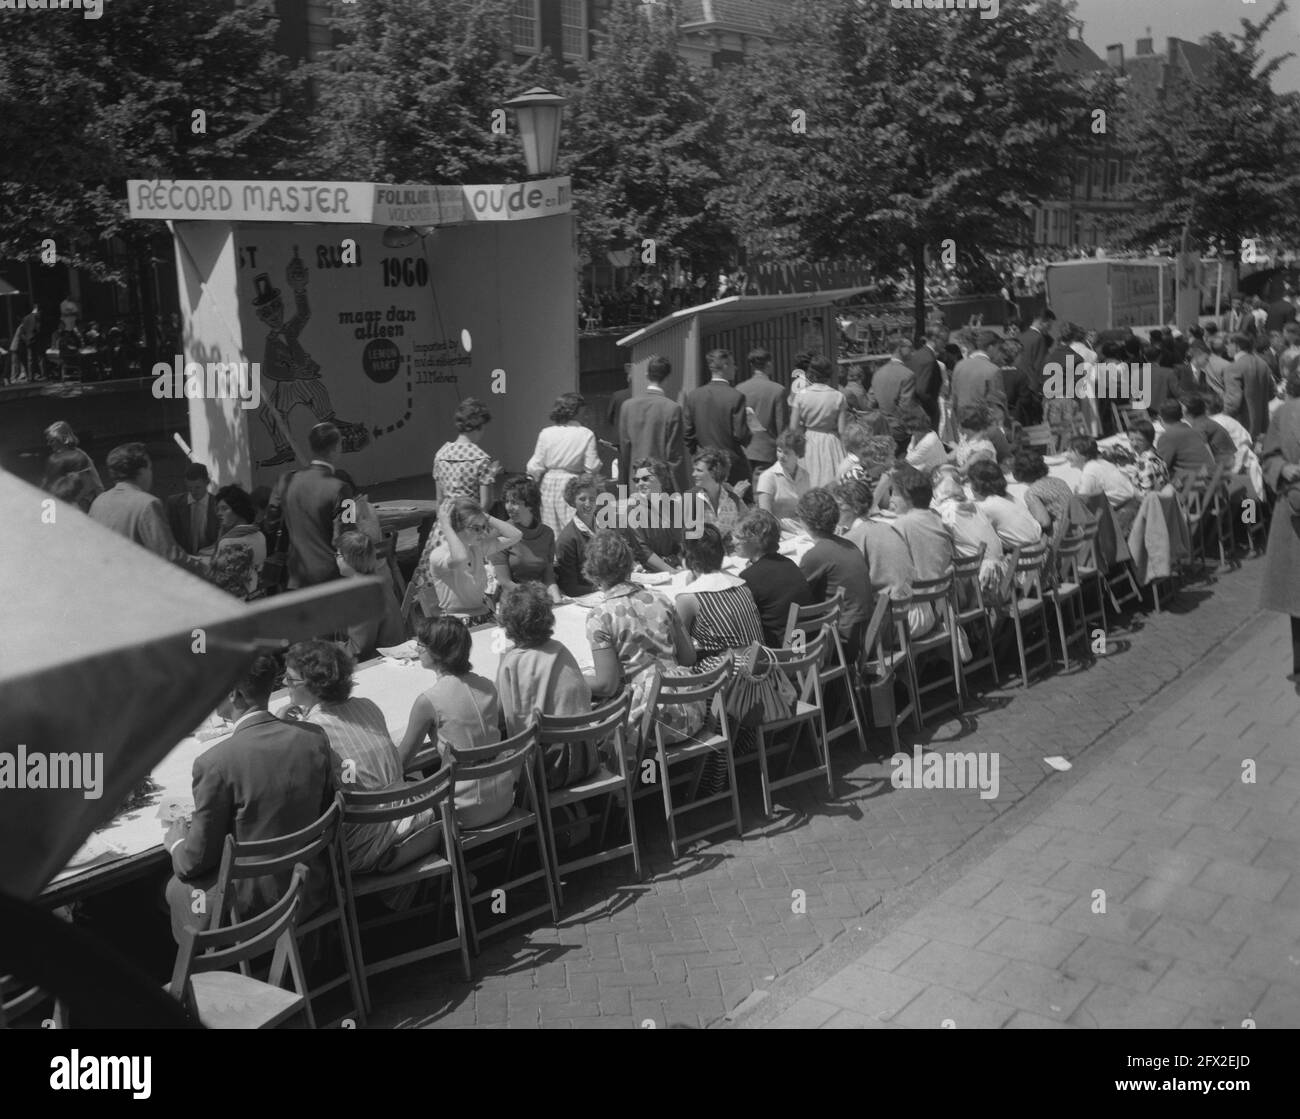 Lunch of 2000 students with Princess Beatrix Leiden, June 15, 1960, STUDENTS, lunch, The Netherlands, 20th century press agency photo, news to remember, documentary, historic photography 1945-1990, visual stories, human history of the Twentieth Century, capturing moments in time Stock Photo